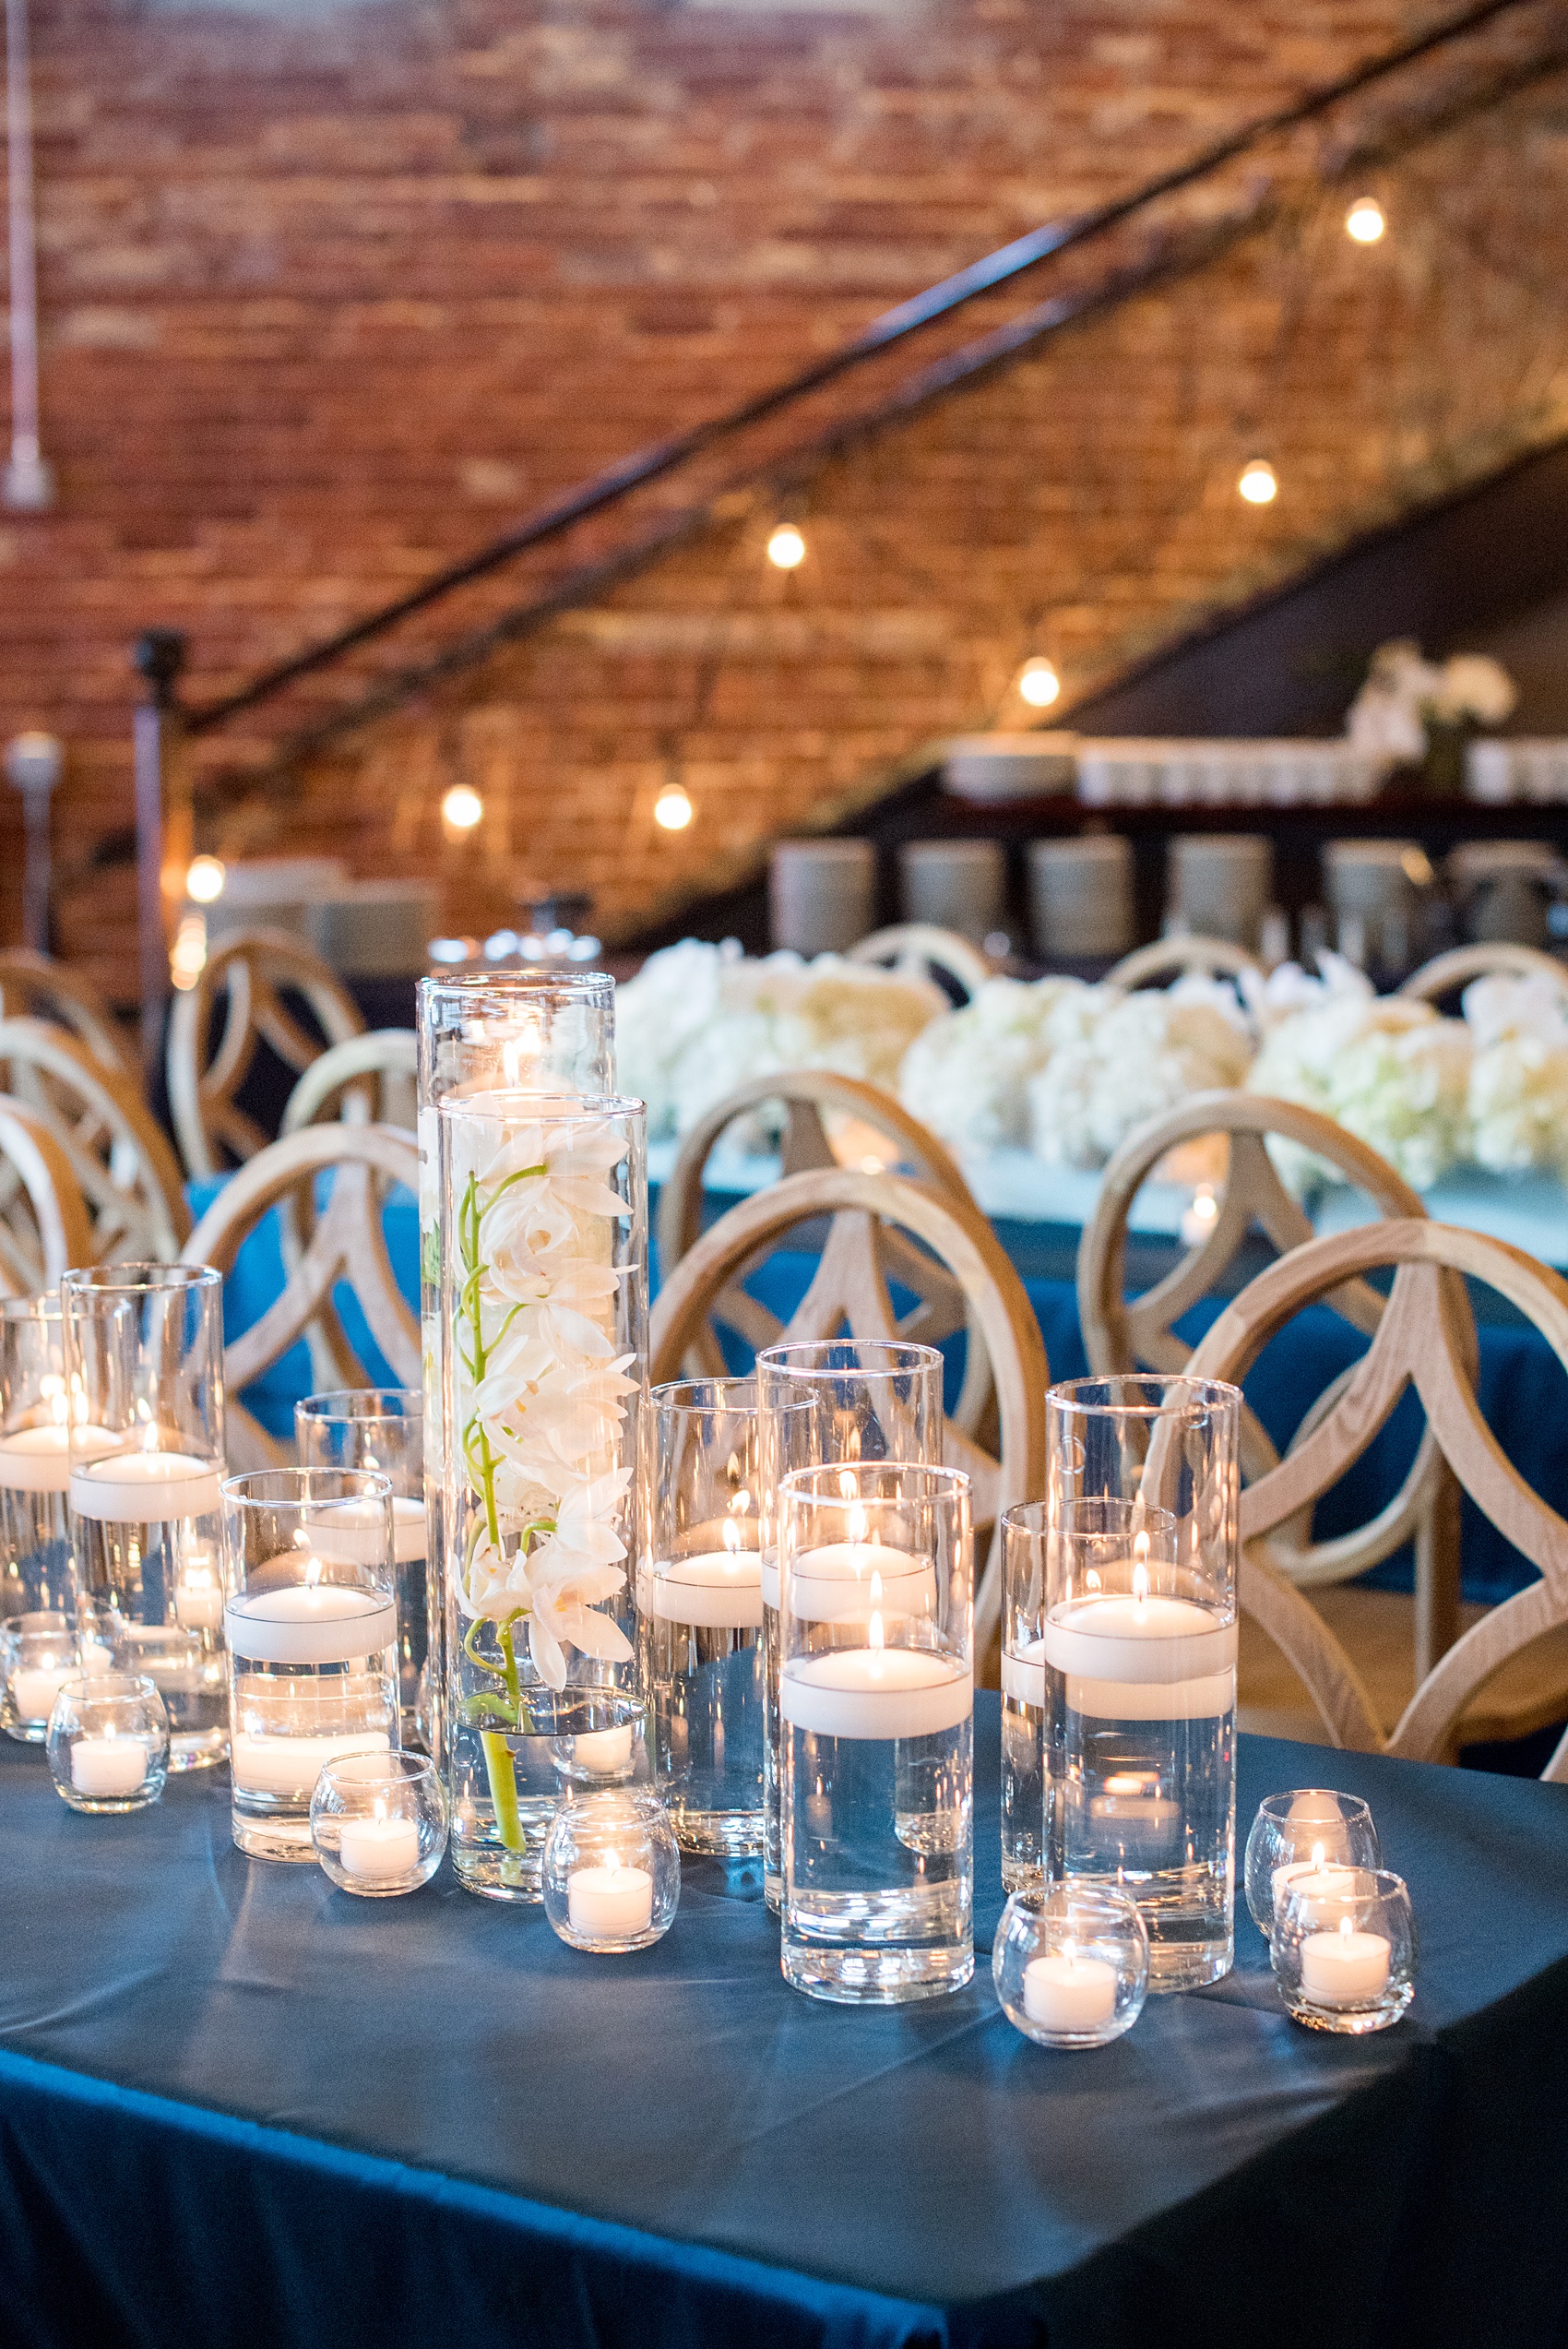 The Cookery Durham wedding photos by Mikkel Paige Photography. Picture of the teal and neutral colored wood palette by Erin McLean Events. Candlelight and rectangular tables were the seating for guests in this charming venue.